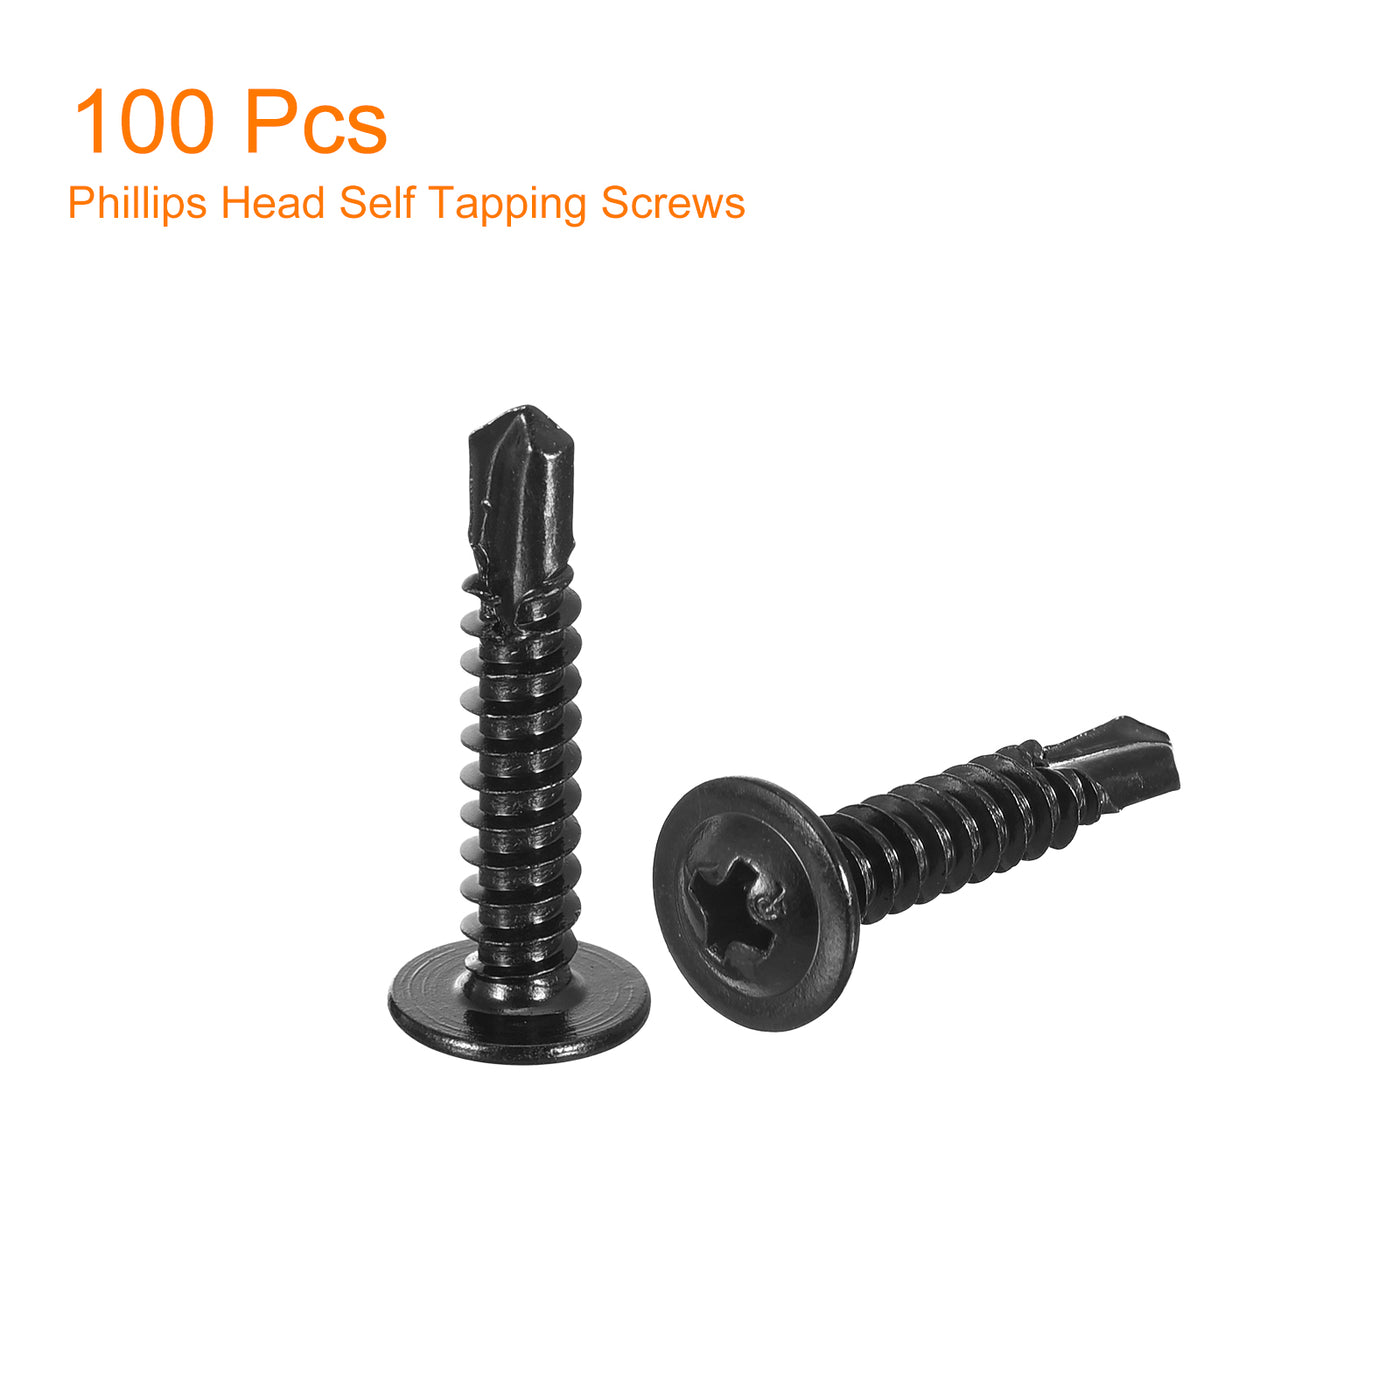 uxcell Uxcell Phillips Head Self Tapping Screws, 100pcs #10x1" Sheet Metal Screw